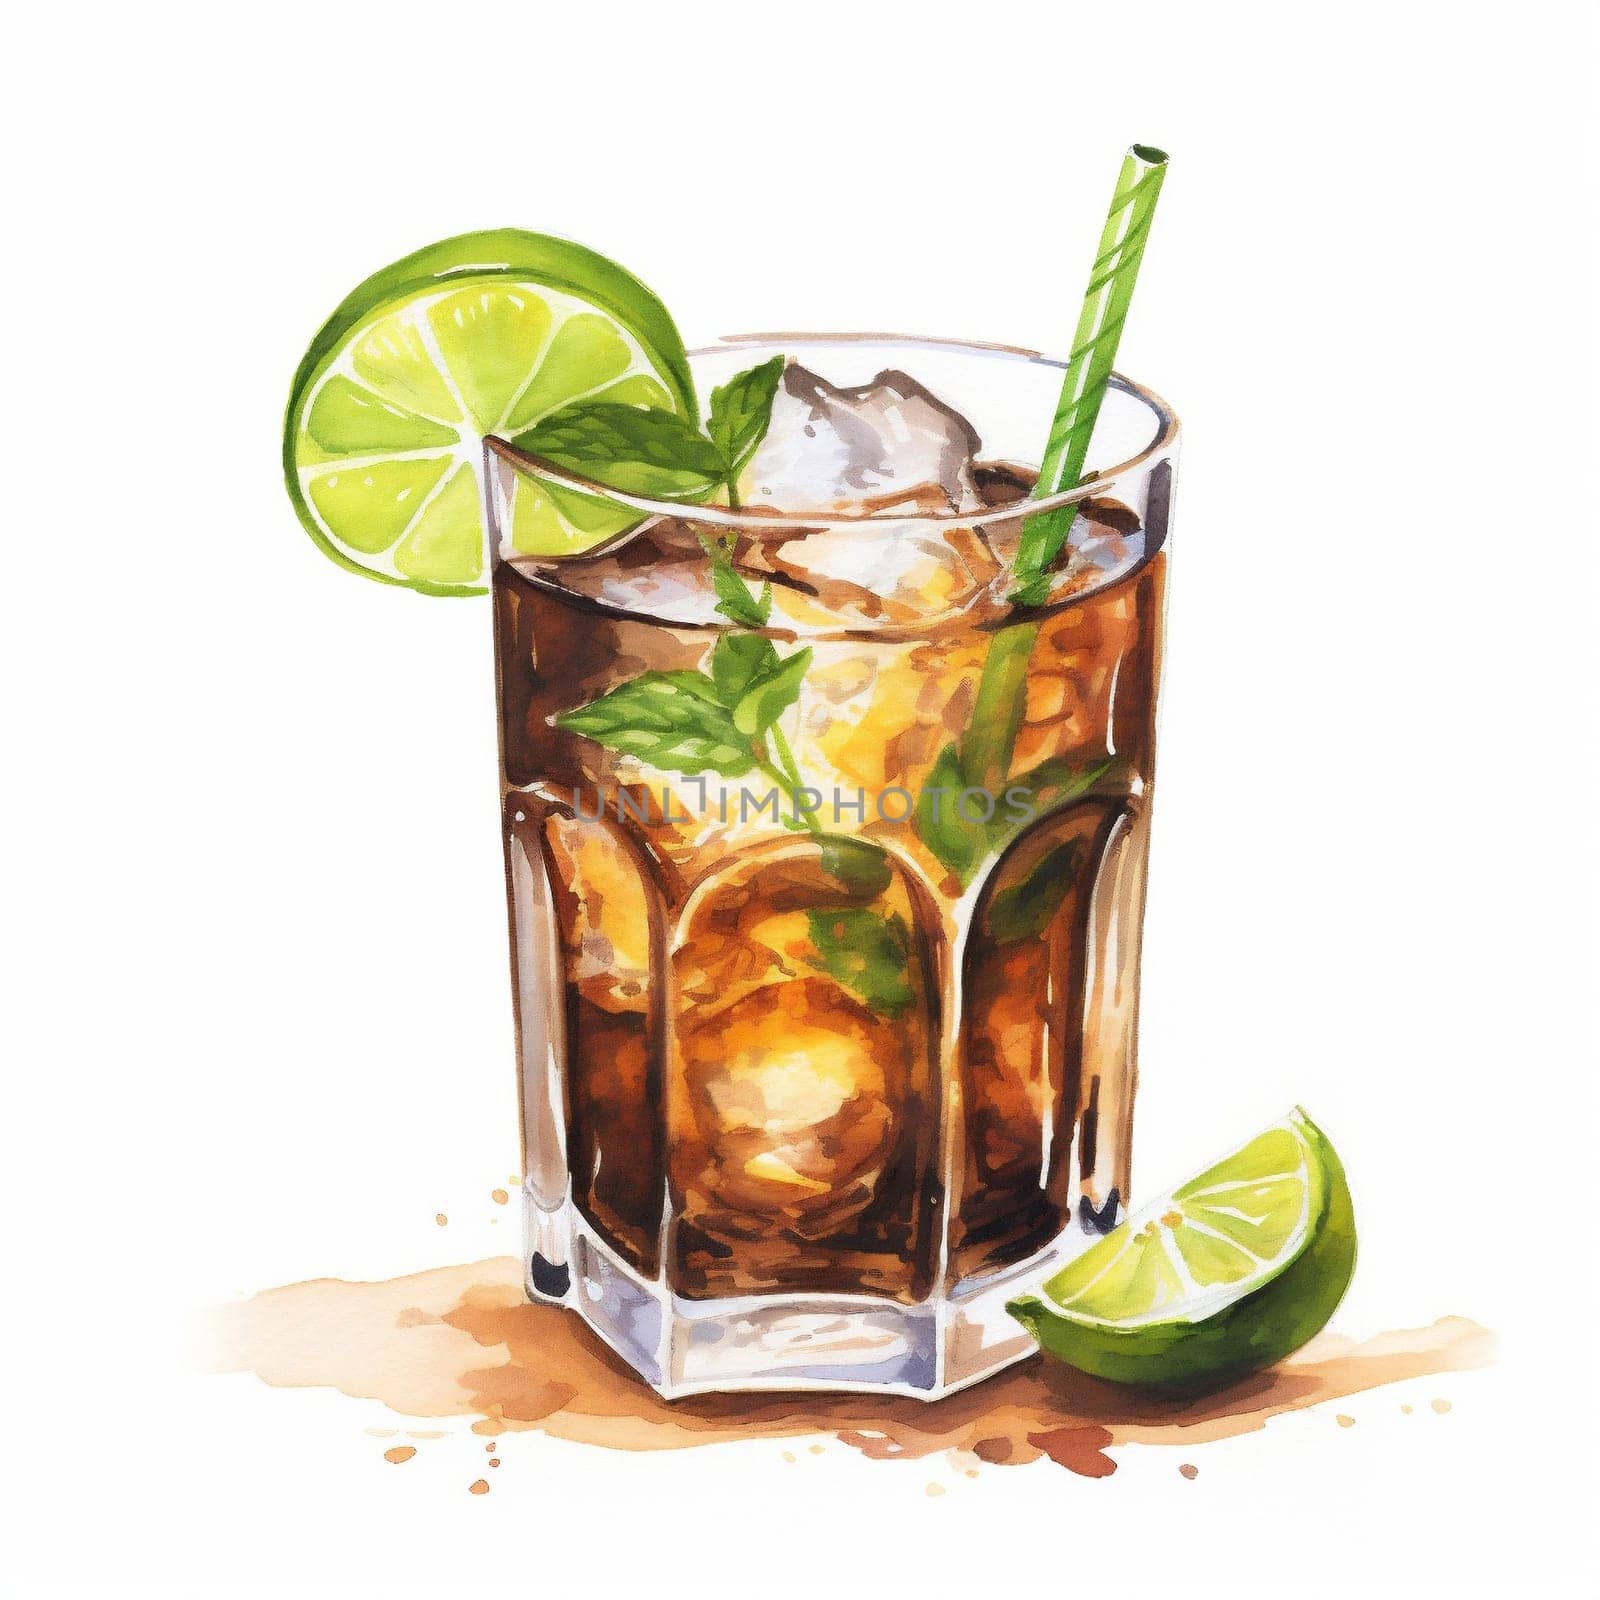 Cuba Libre Cocktail Day with Rum, Cola, Lime and Mint Leaves. Hand Drawn Coctail Day Sketch on White Background.